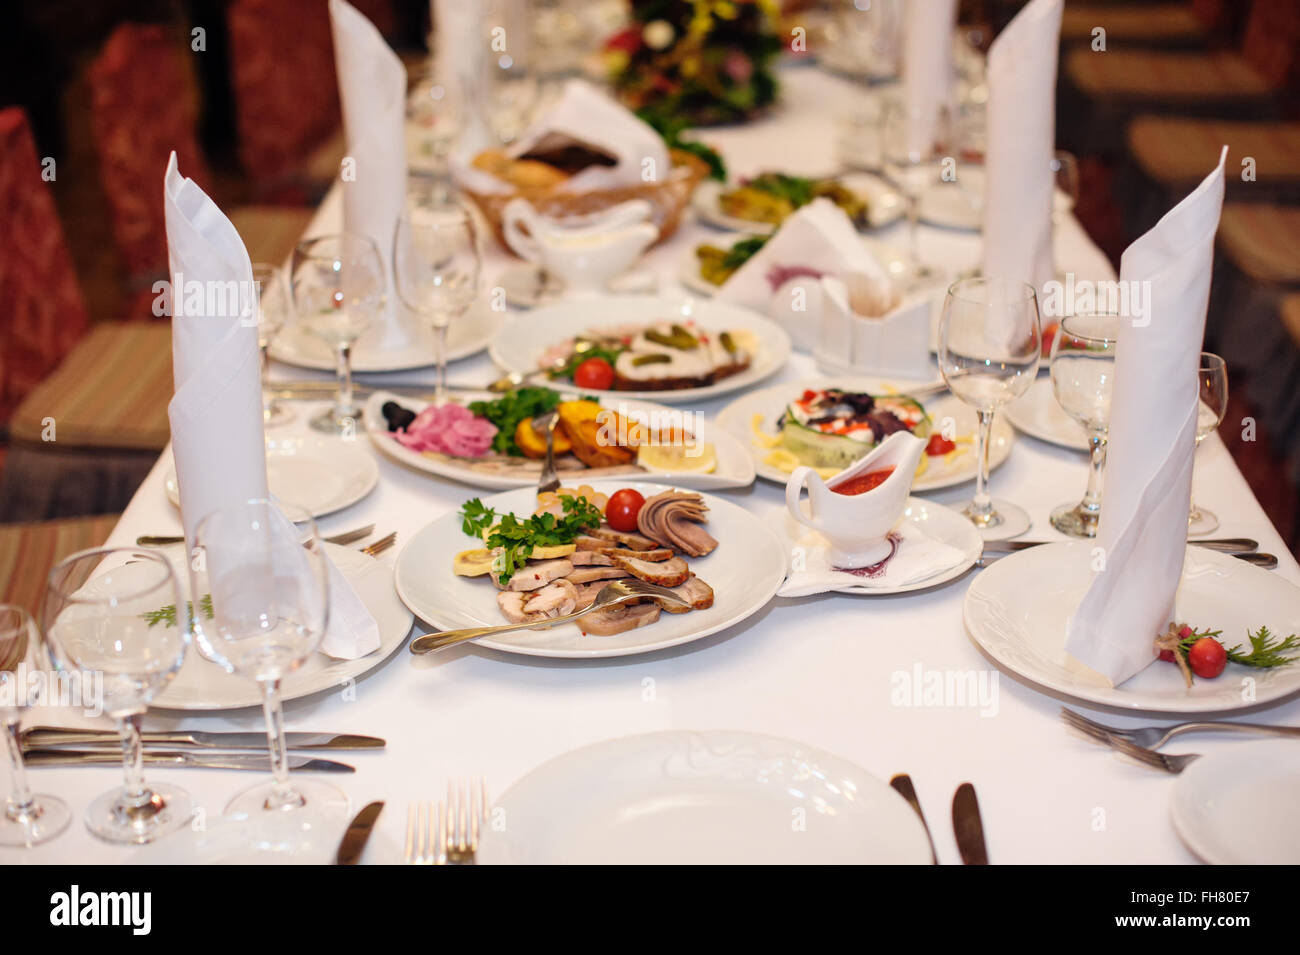 decorated table for a wedding dinner in the restaurant Stock Photo